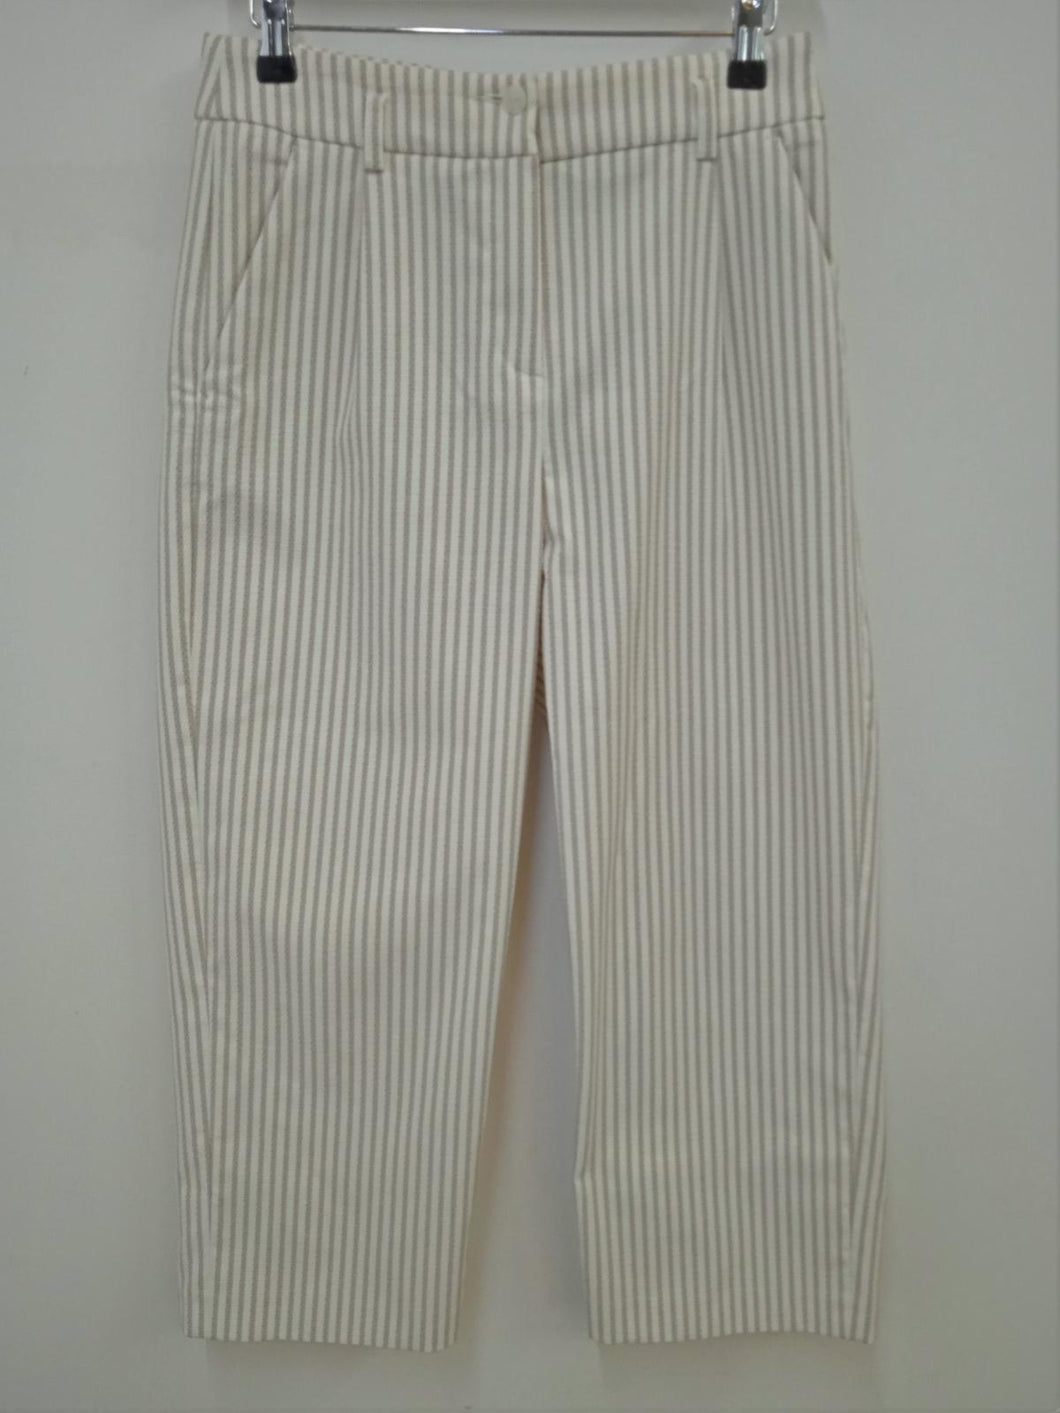 PETER HAHN Ladies Beige Cotton Blend Striped Cropped Trousers UK10 W28 L21